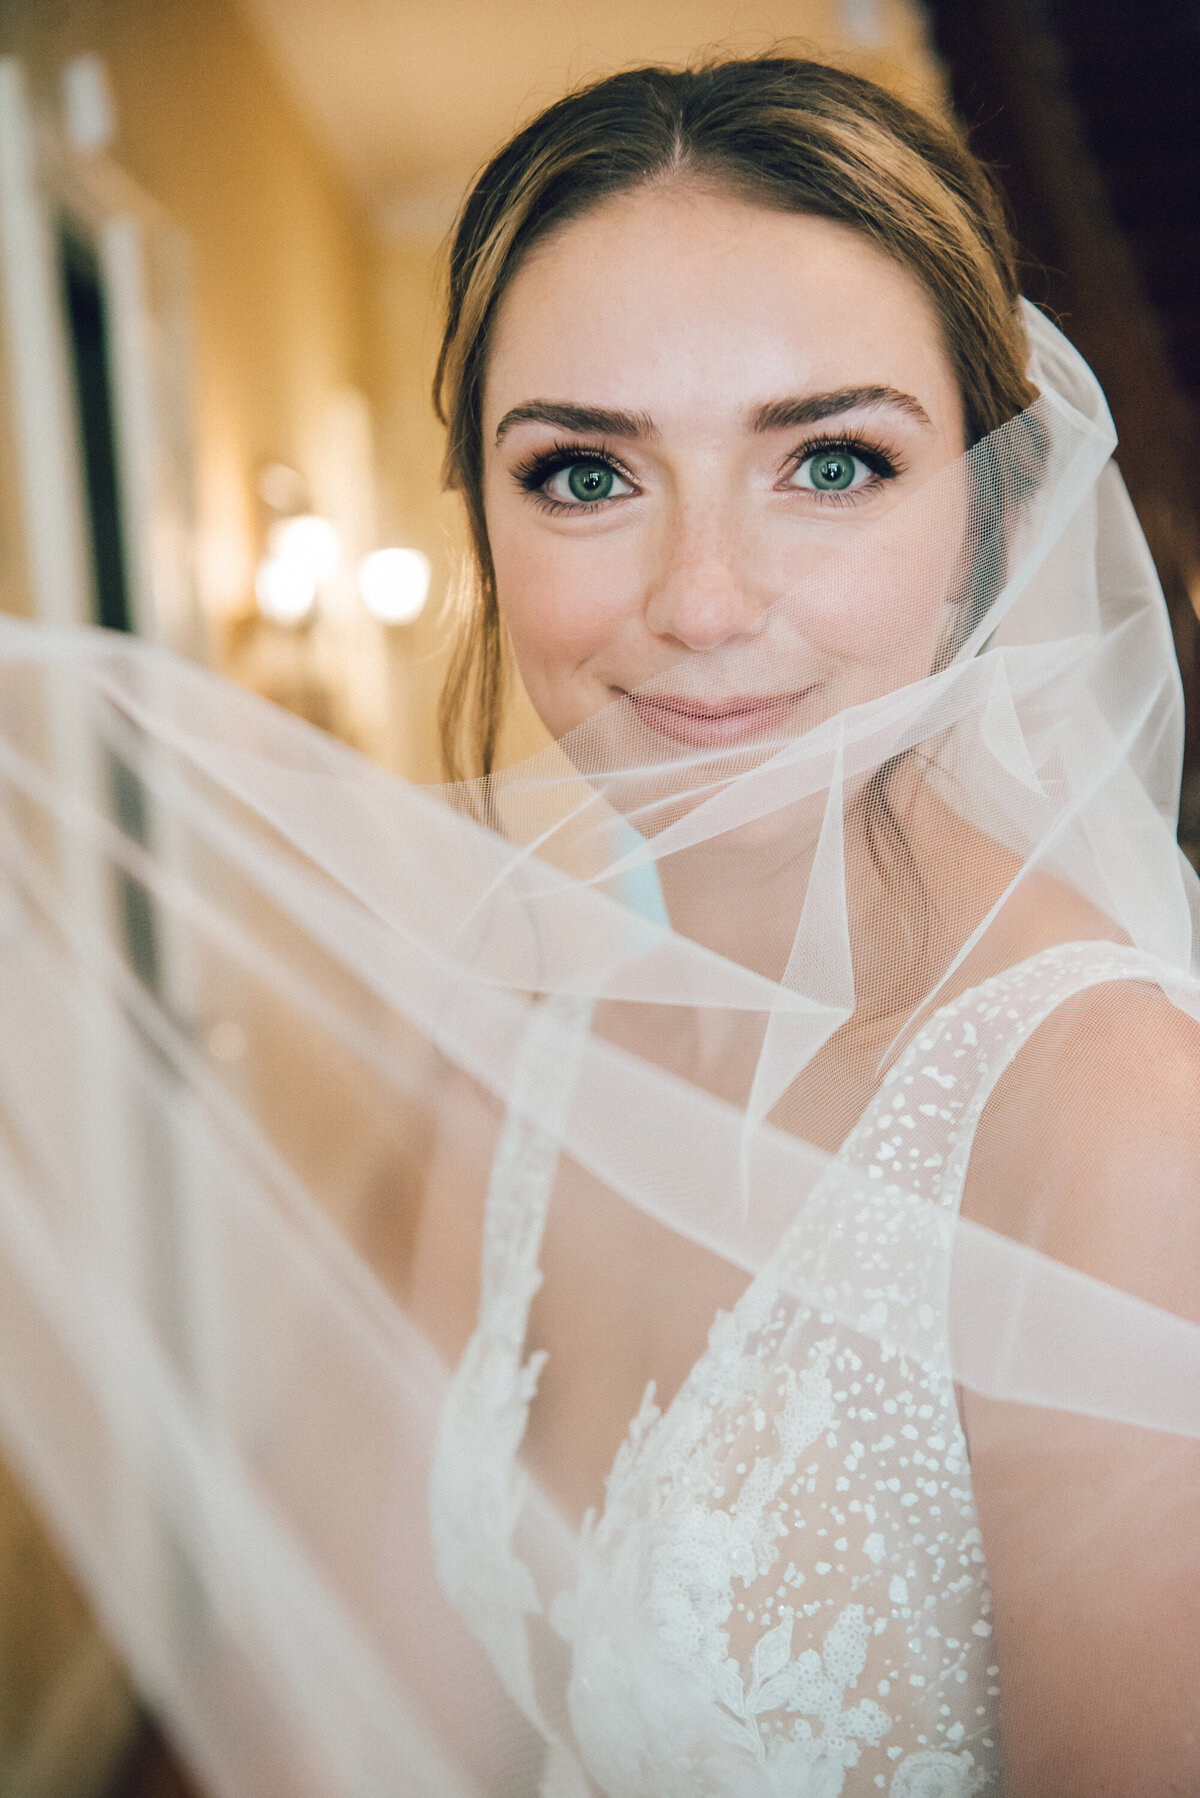 erica-renee-beauty-hair-and-makeup-duo-traveling-Stone-Acres-Stonington-bride-clean-fresh-modern-natural-makeup-NYC-bride